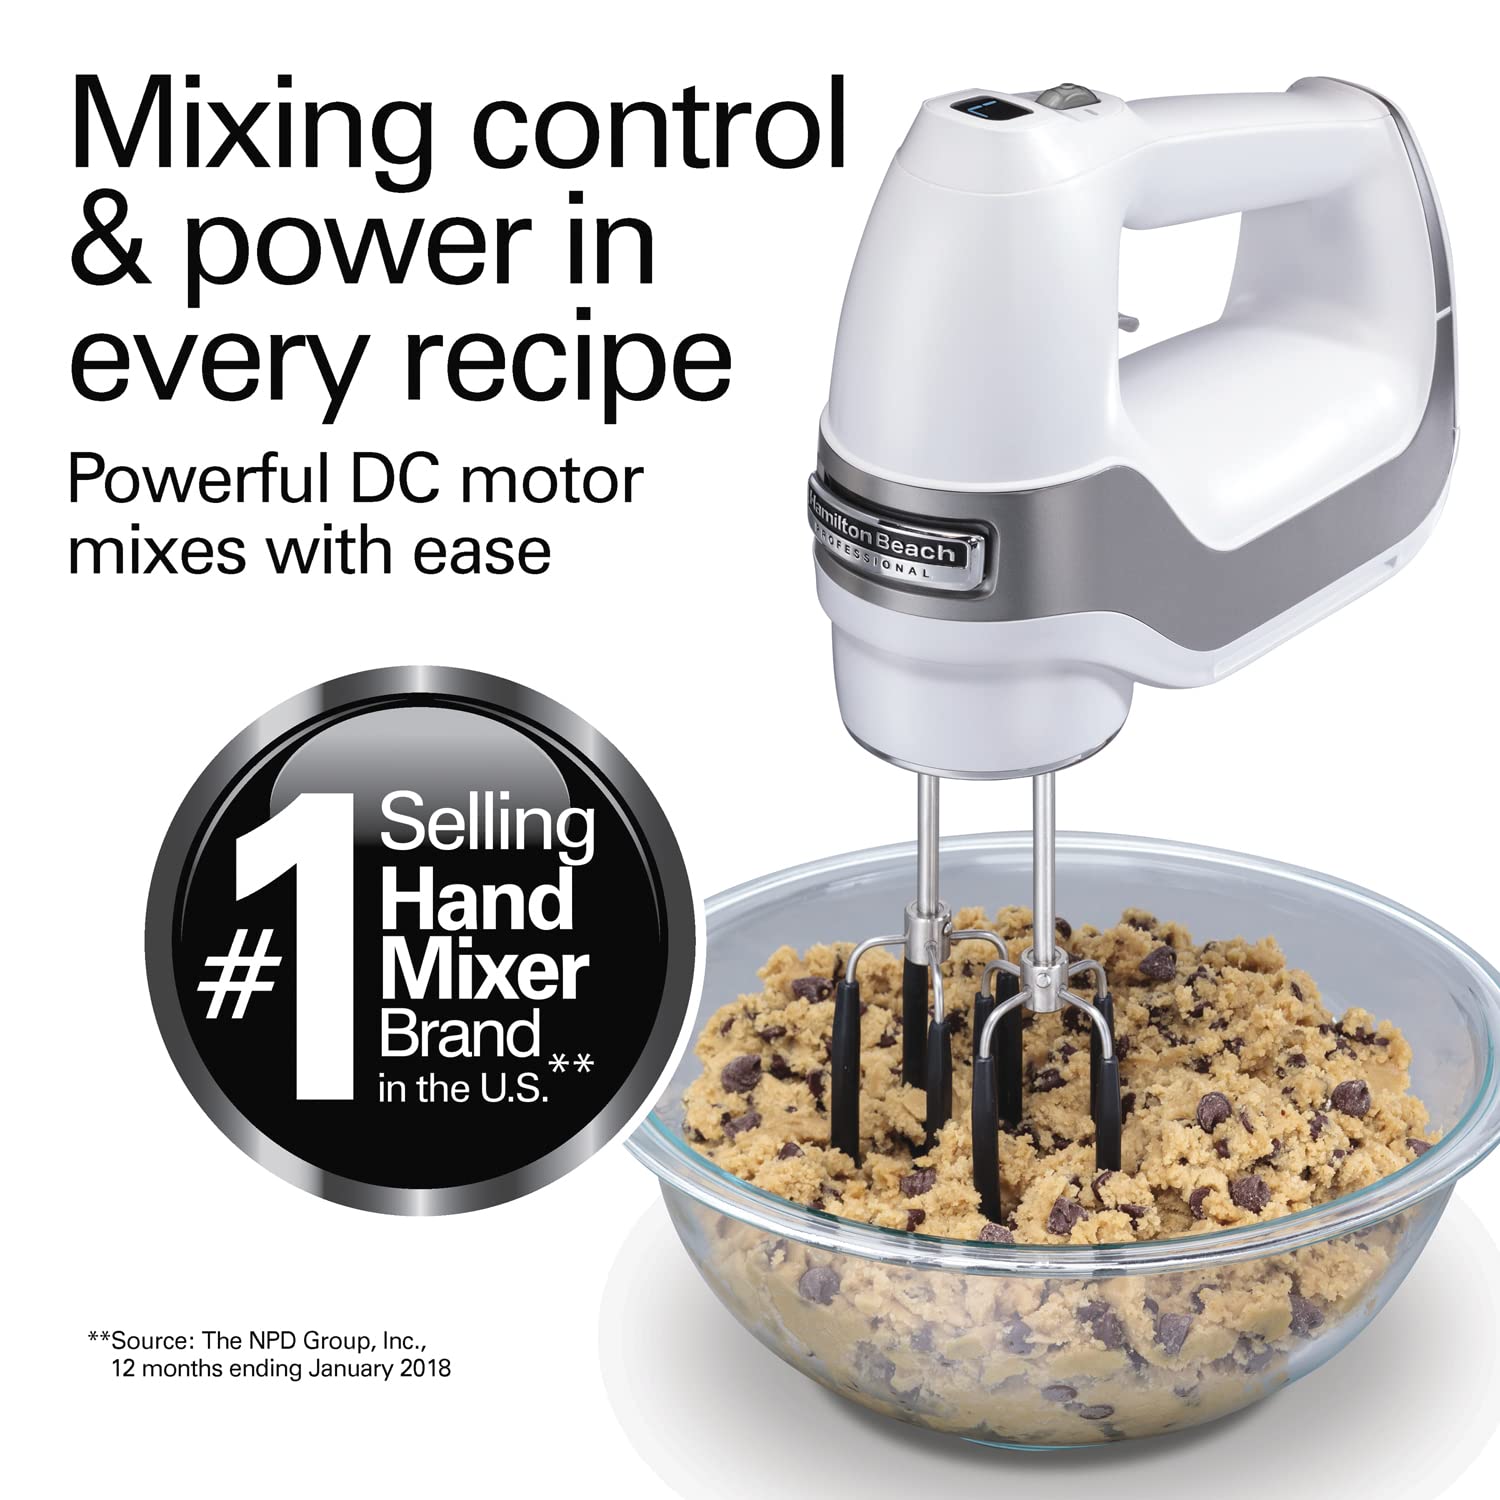 Hamilton Beach Professional 7-Speed Digital Electric Hand Mixer with High-Performance DC Motor, Slow Start, Snap-On Storage Case, SoftScrape Beaters, Whisk, Dough Hooks, White (62656)